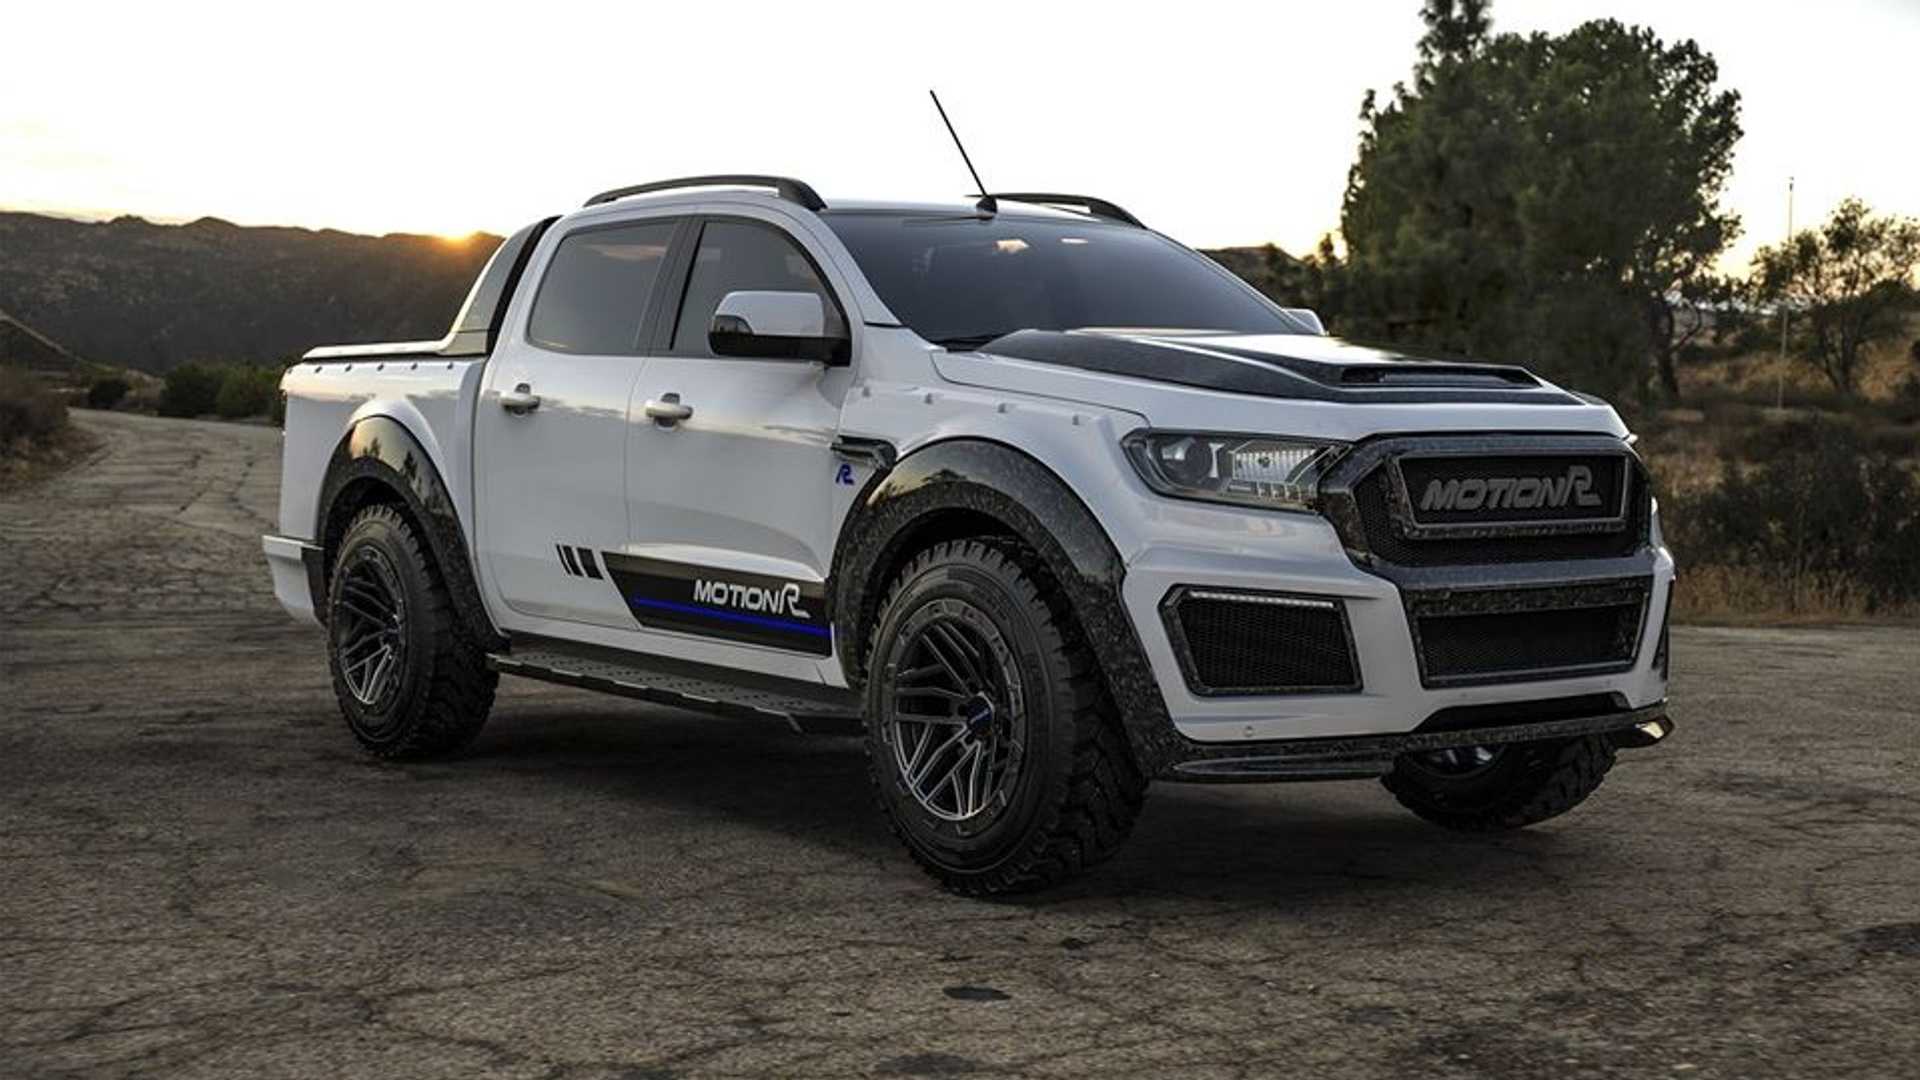 Motion R S Carbon Fiber Therapy Works Wonders For This Modified Ford Ranger Autoevolution